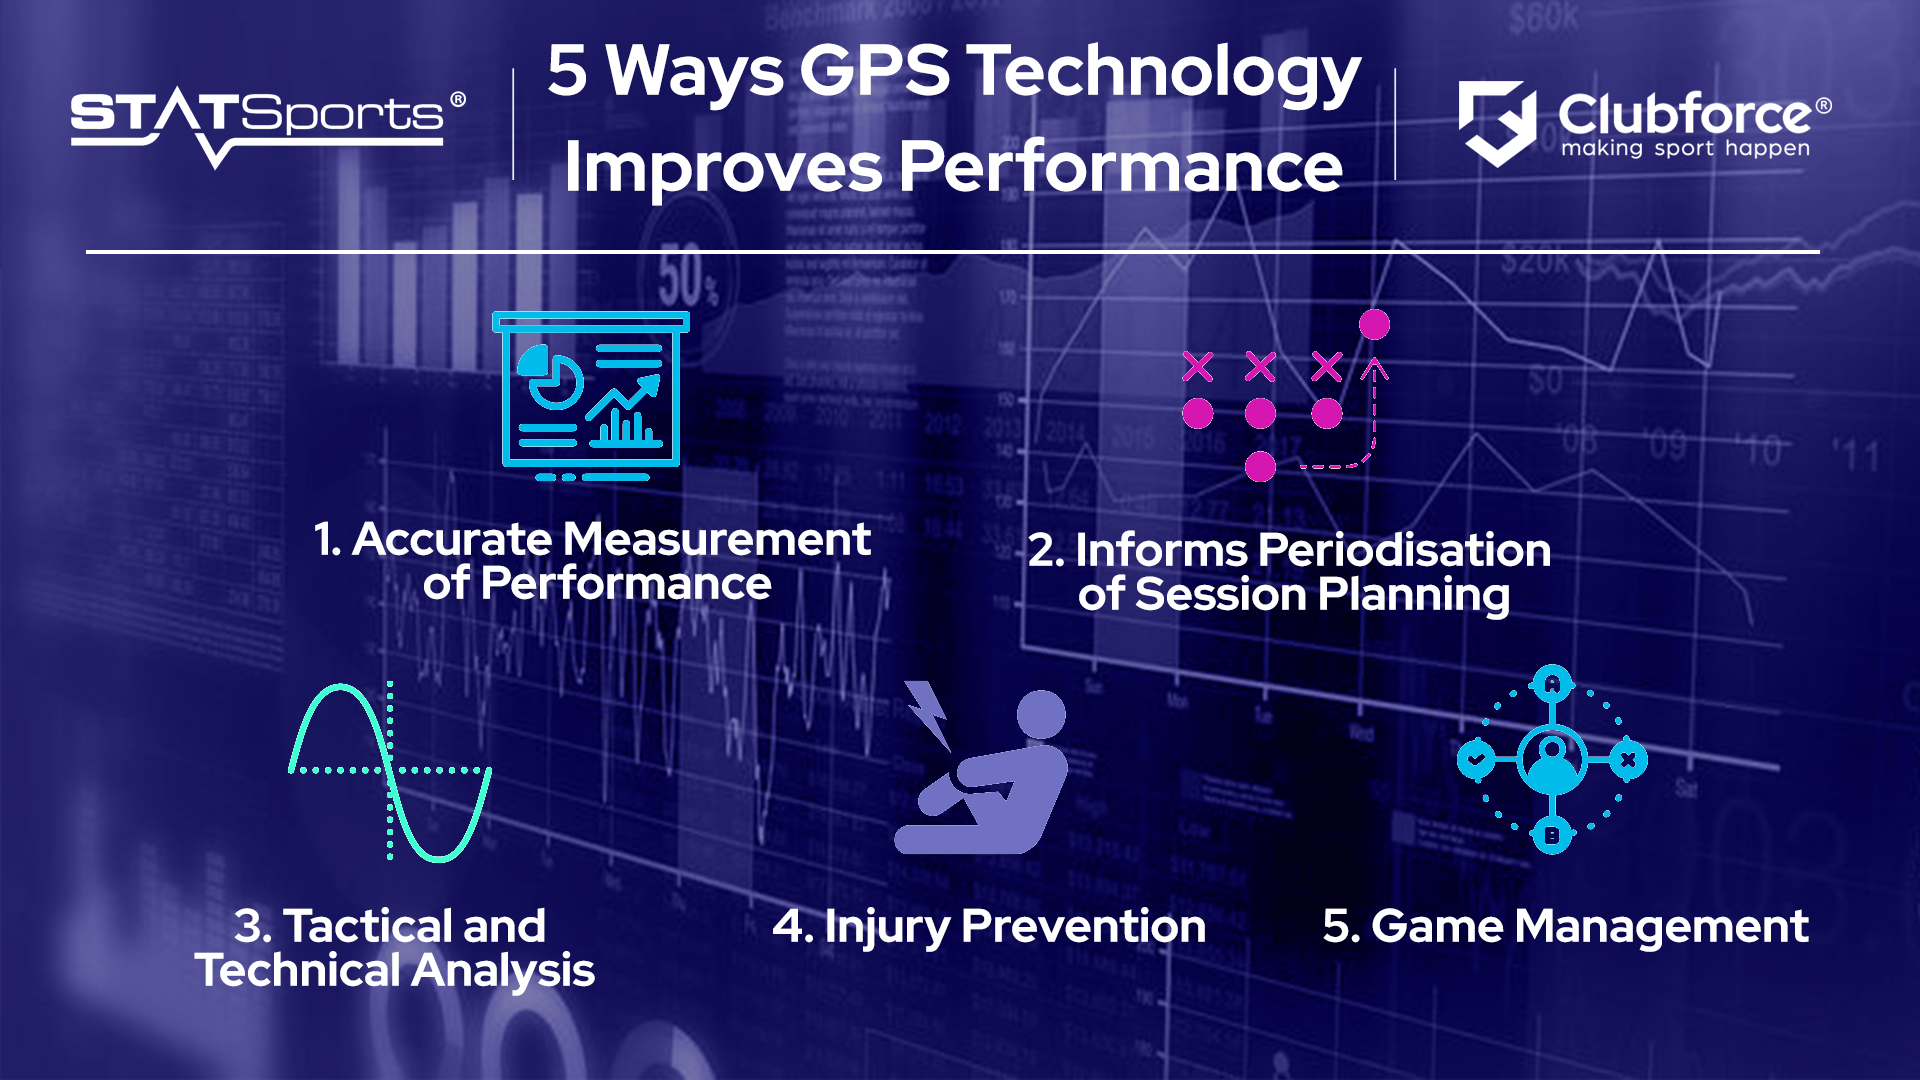 How to Use GPS Tracking Technologies in Sports?